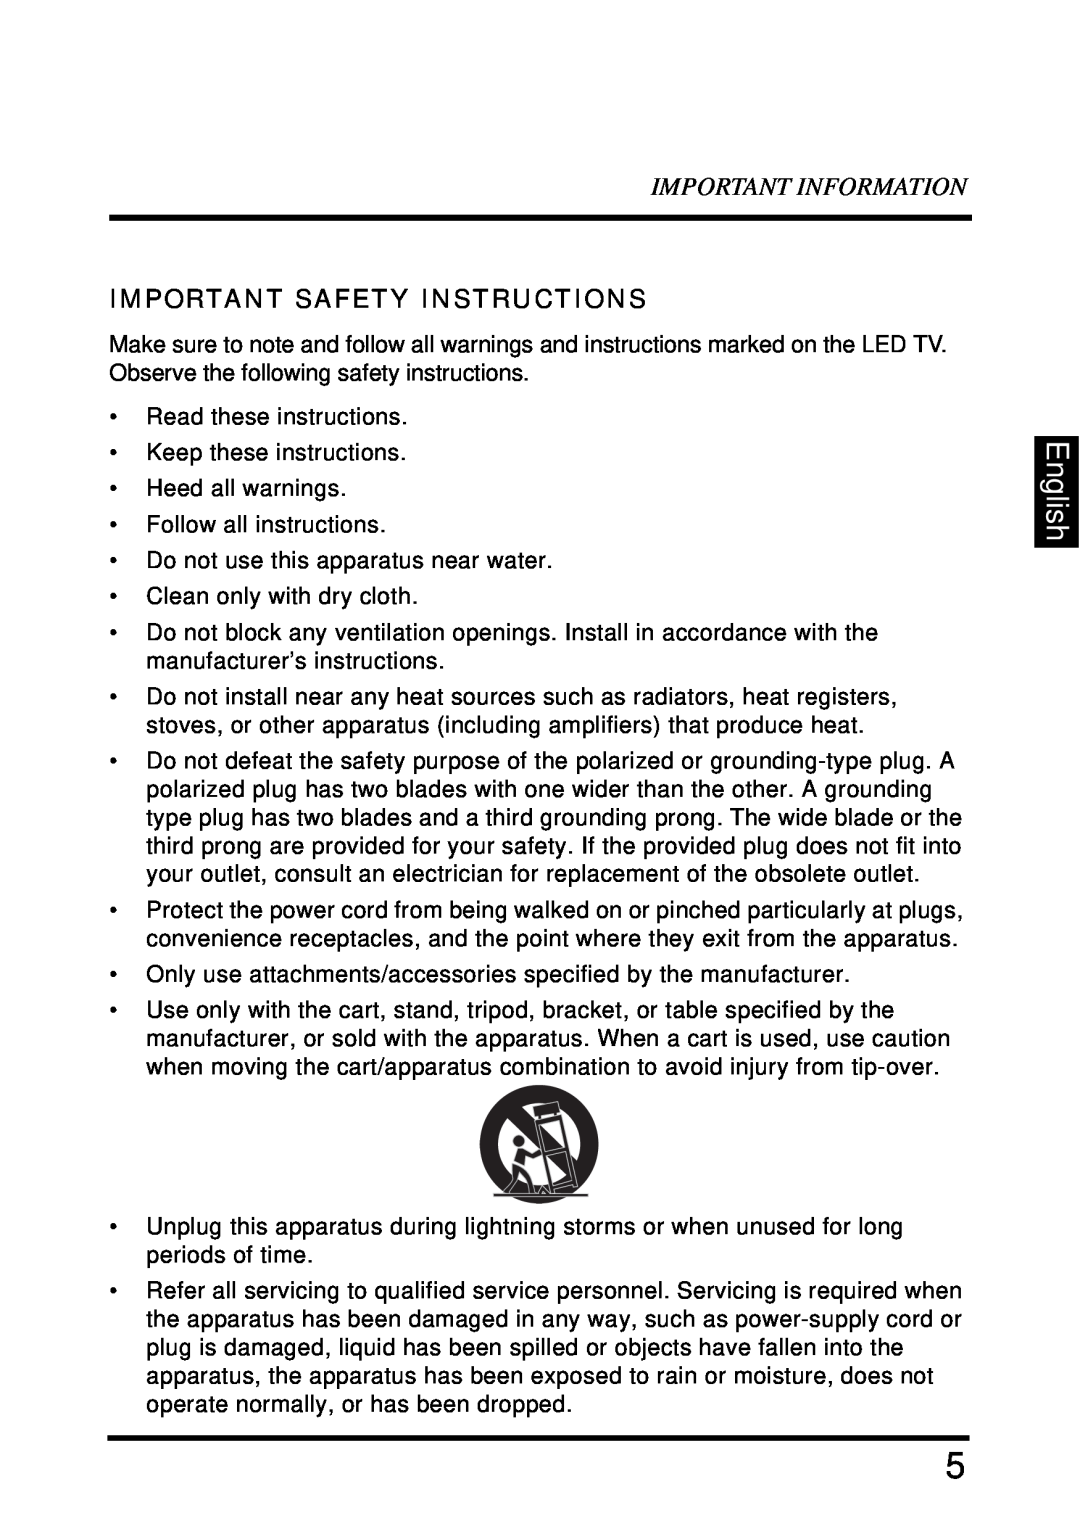 Westinghouse LD-4680 user manual English, Important Information, Important Safety Instructions 